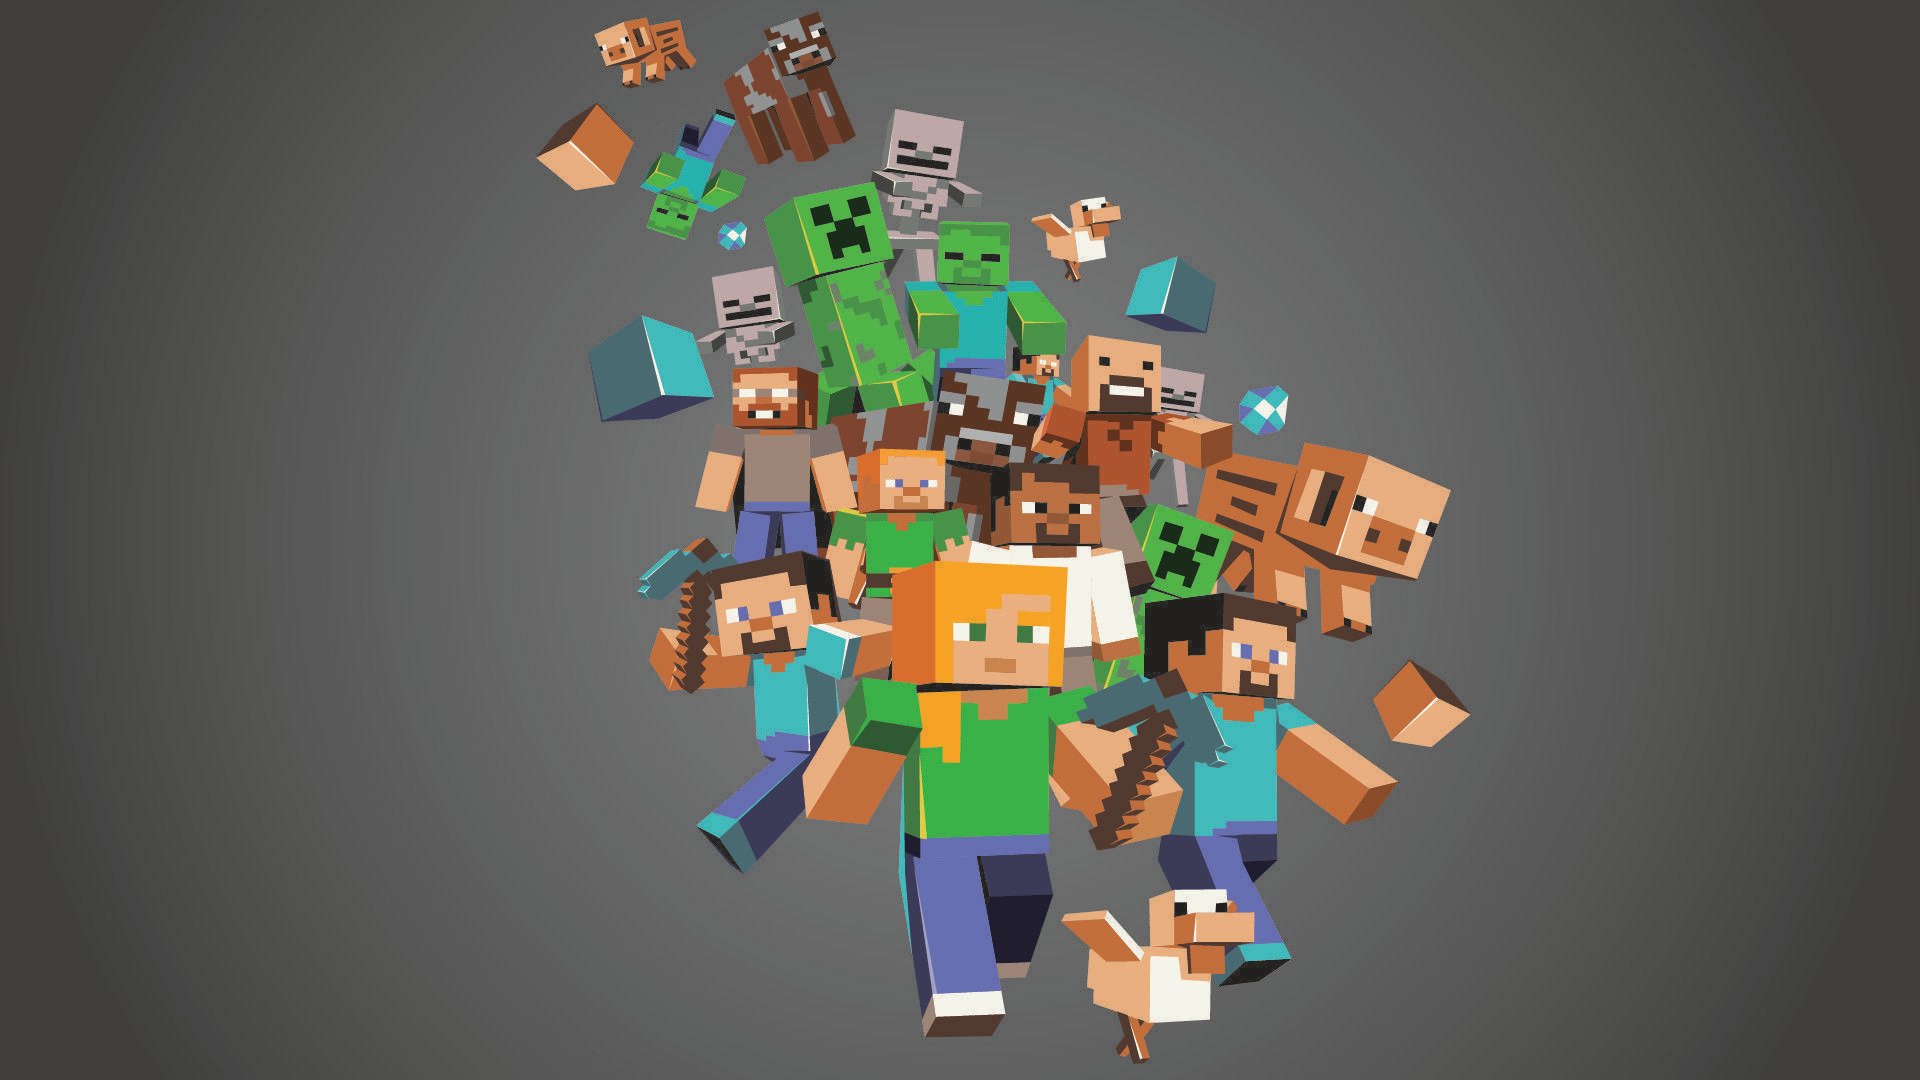 Cool Minecraft Backgrounds - Wallpaper Cave